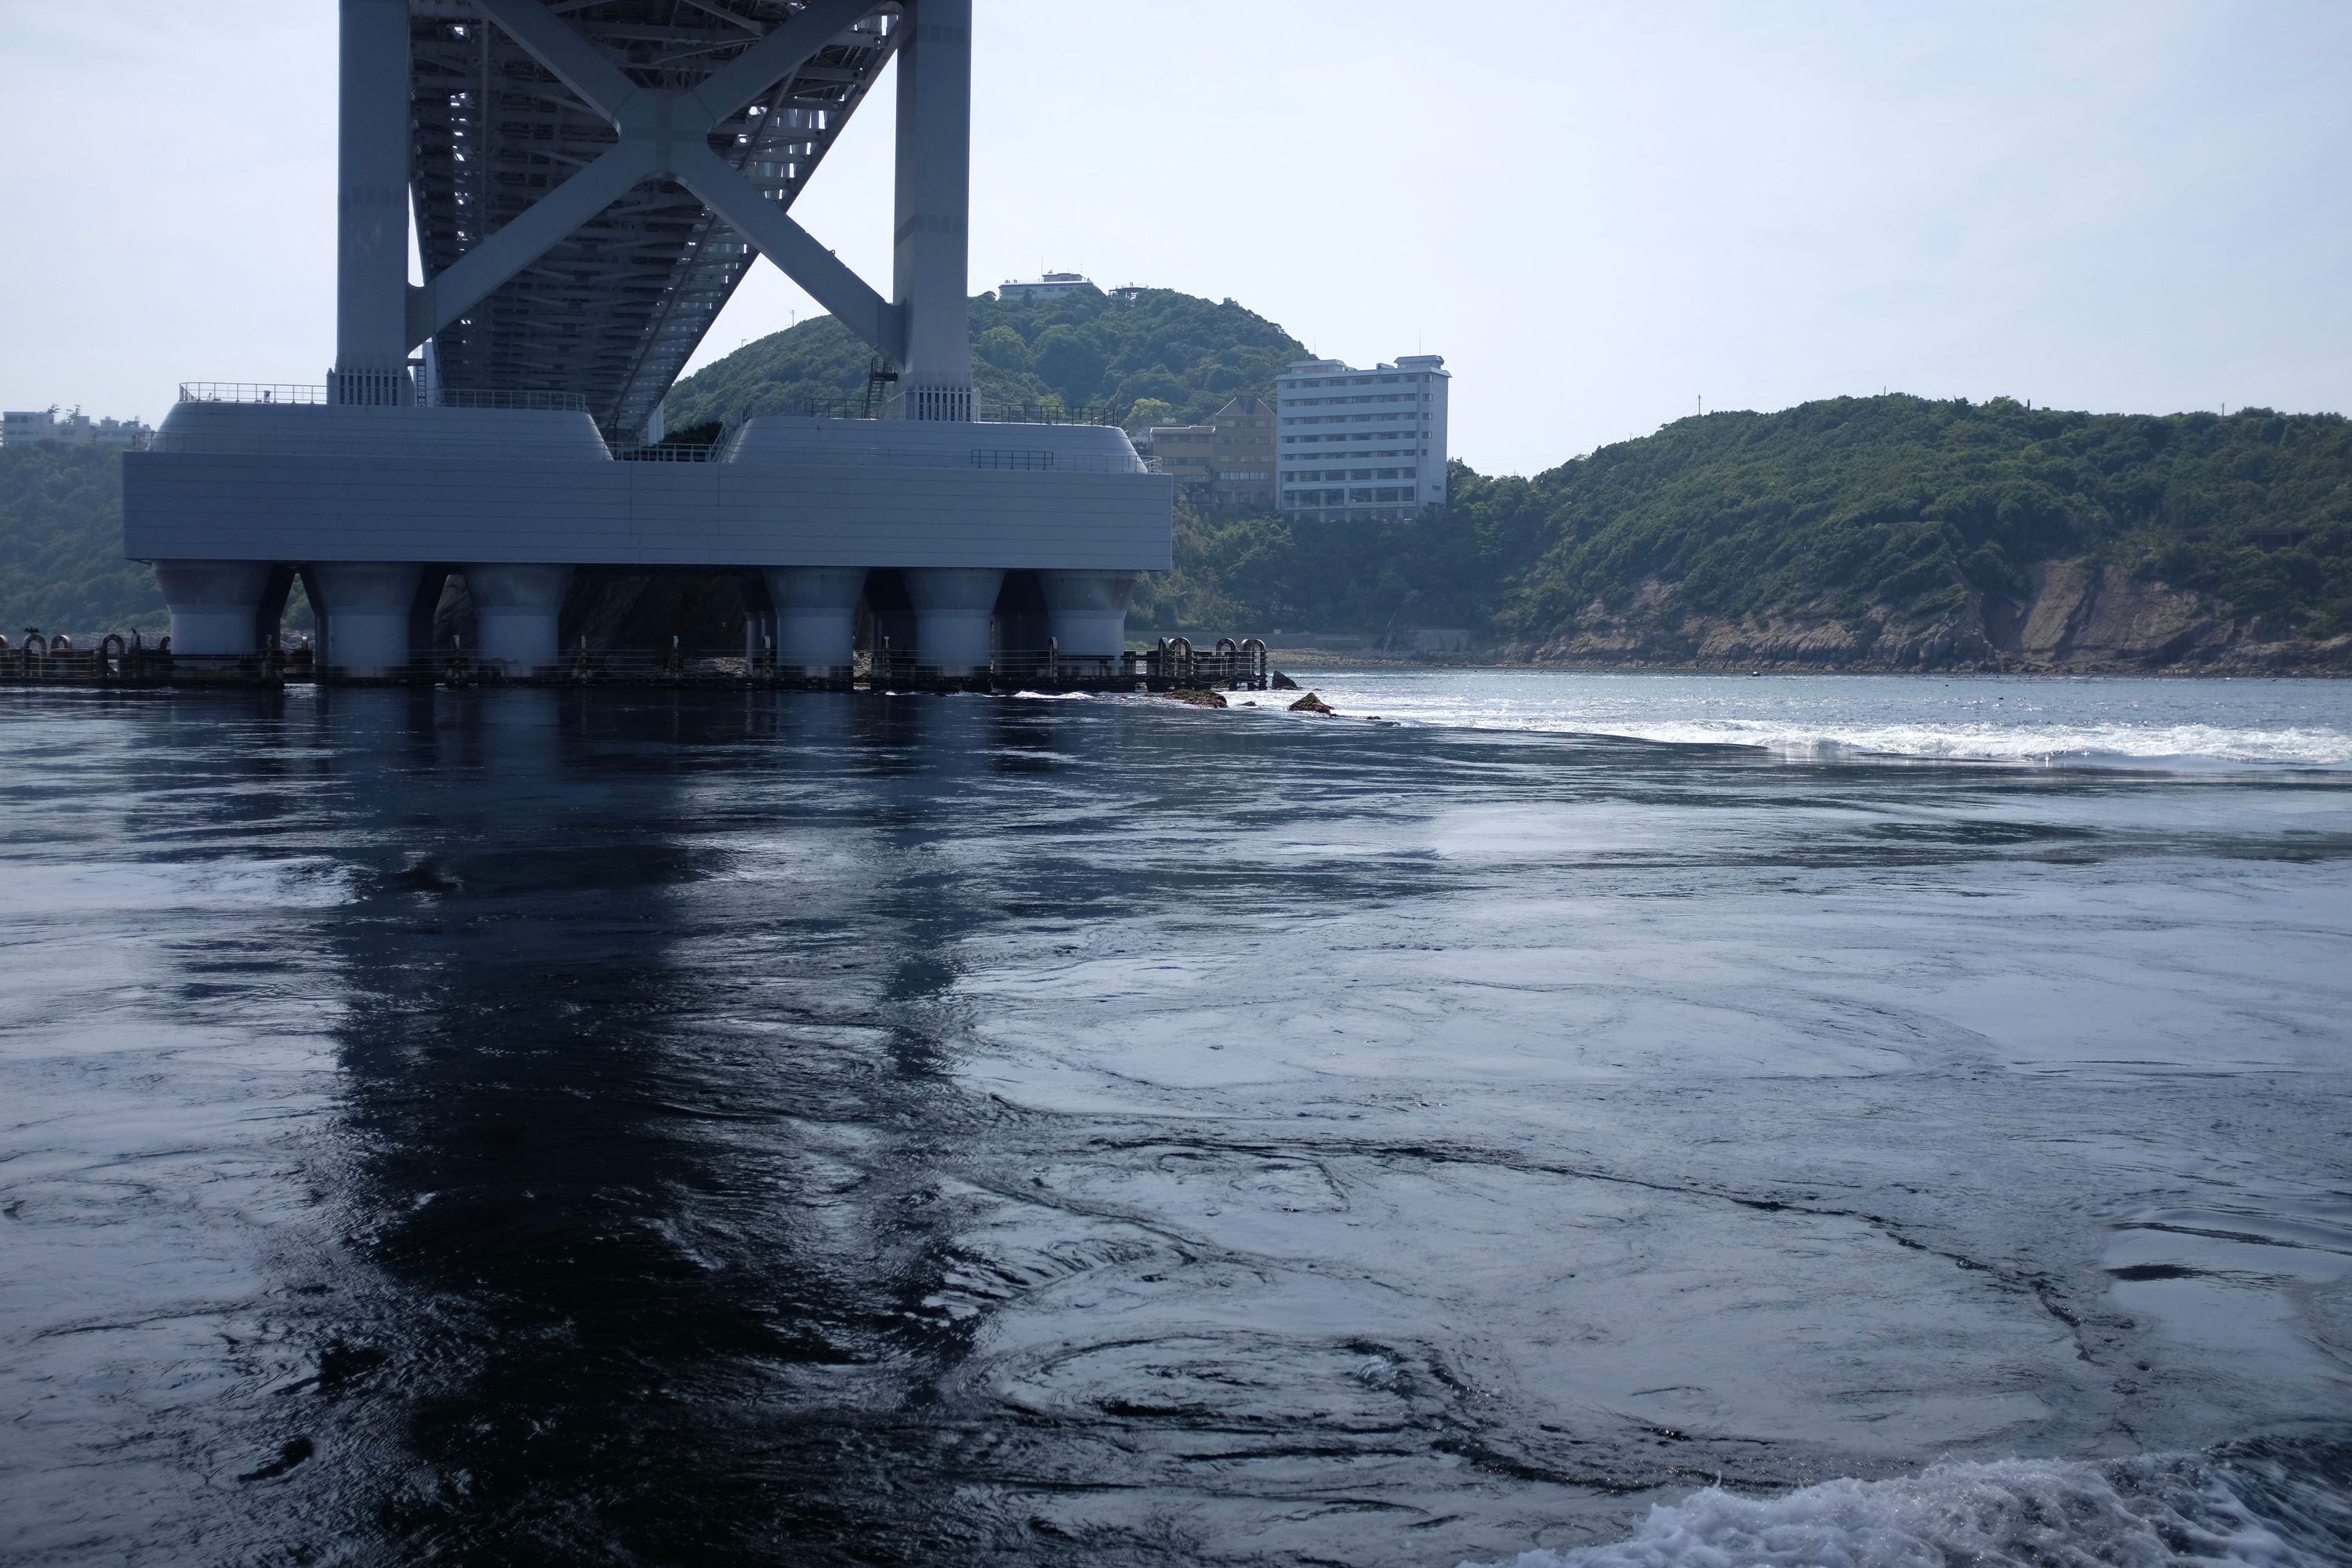 The churning water of the Naruto Whirlpools as seen from a small boat right under the Great Naruto Bridge.